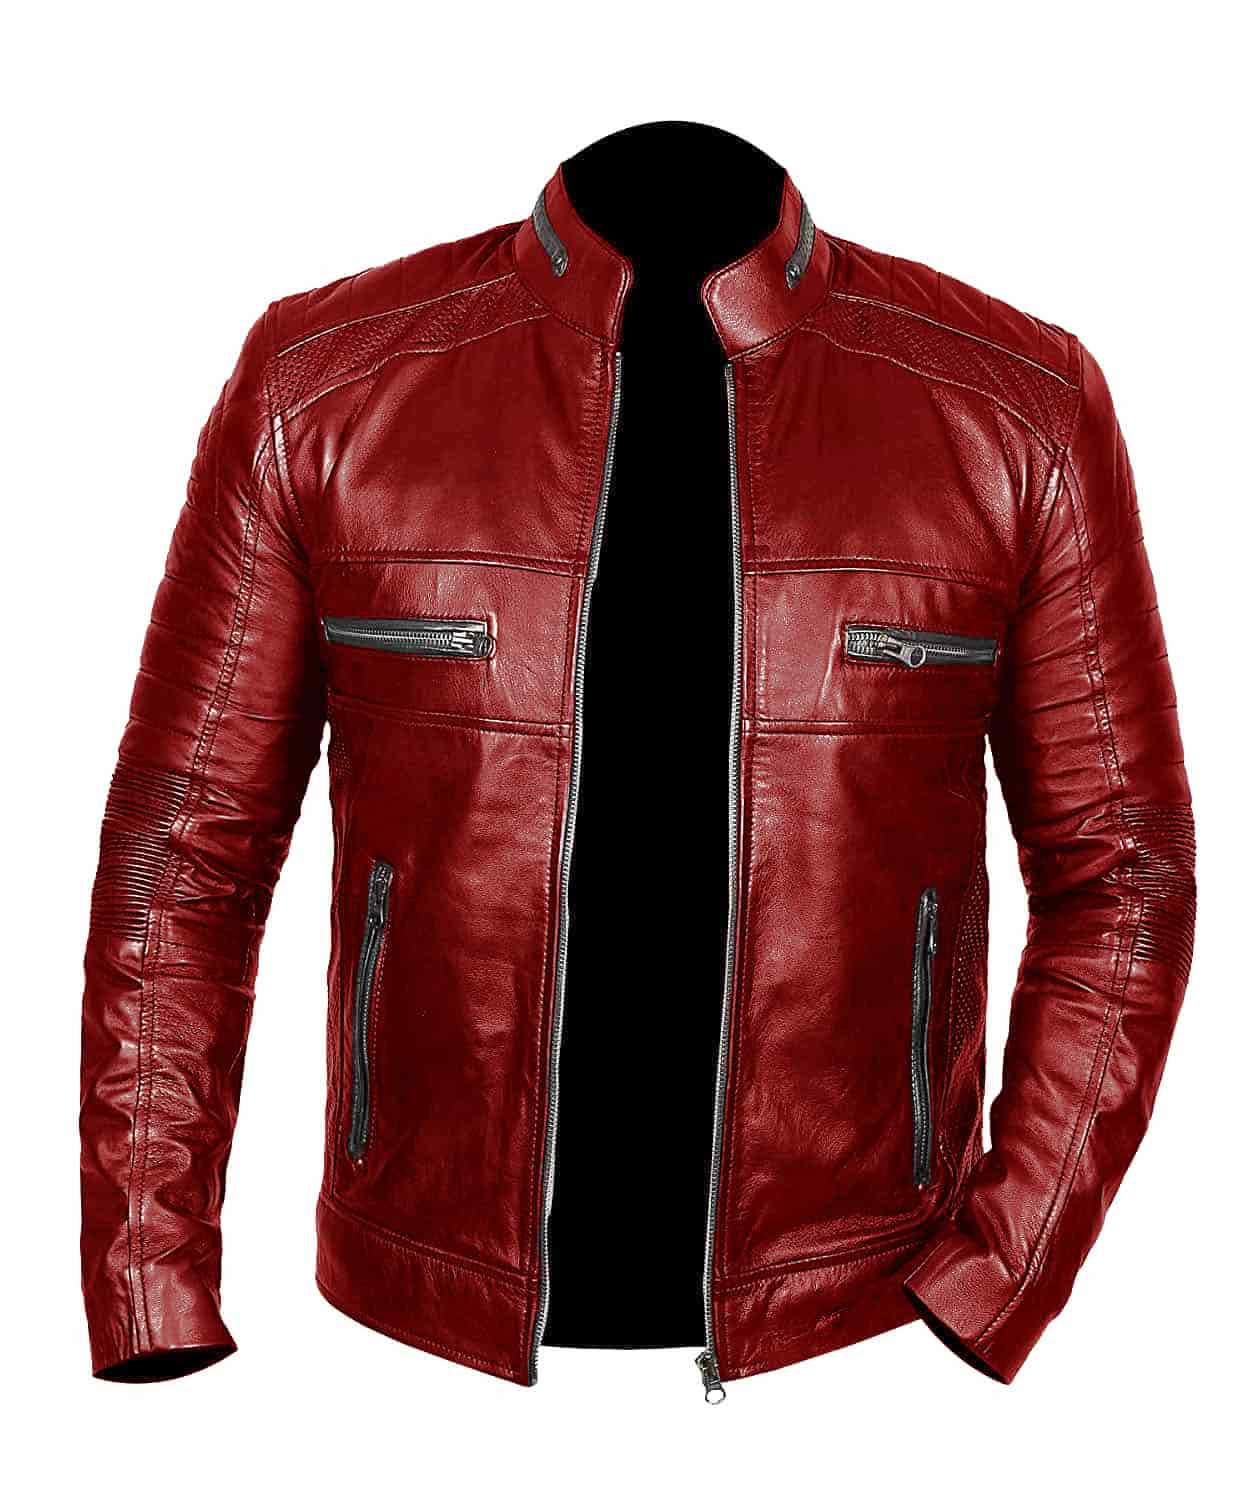 Mens Red Leather Jacket for Sale